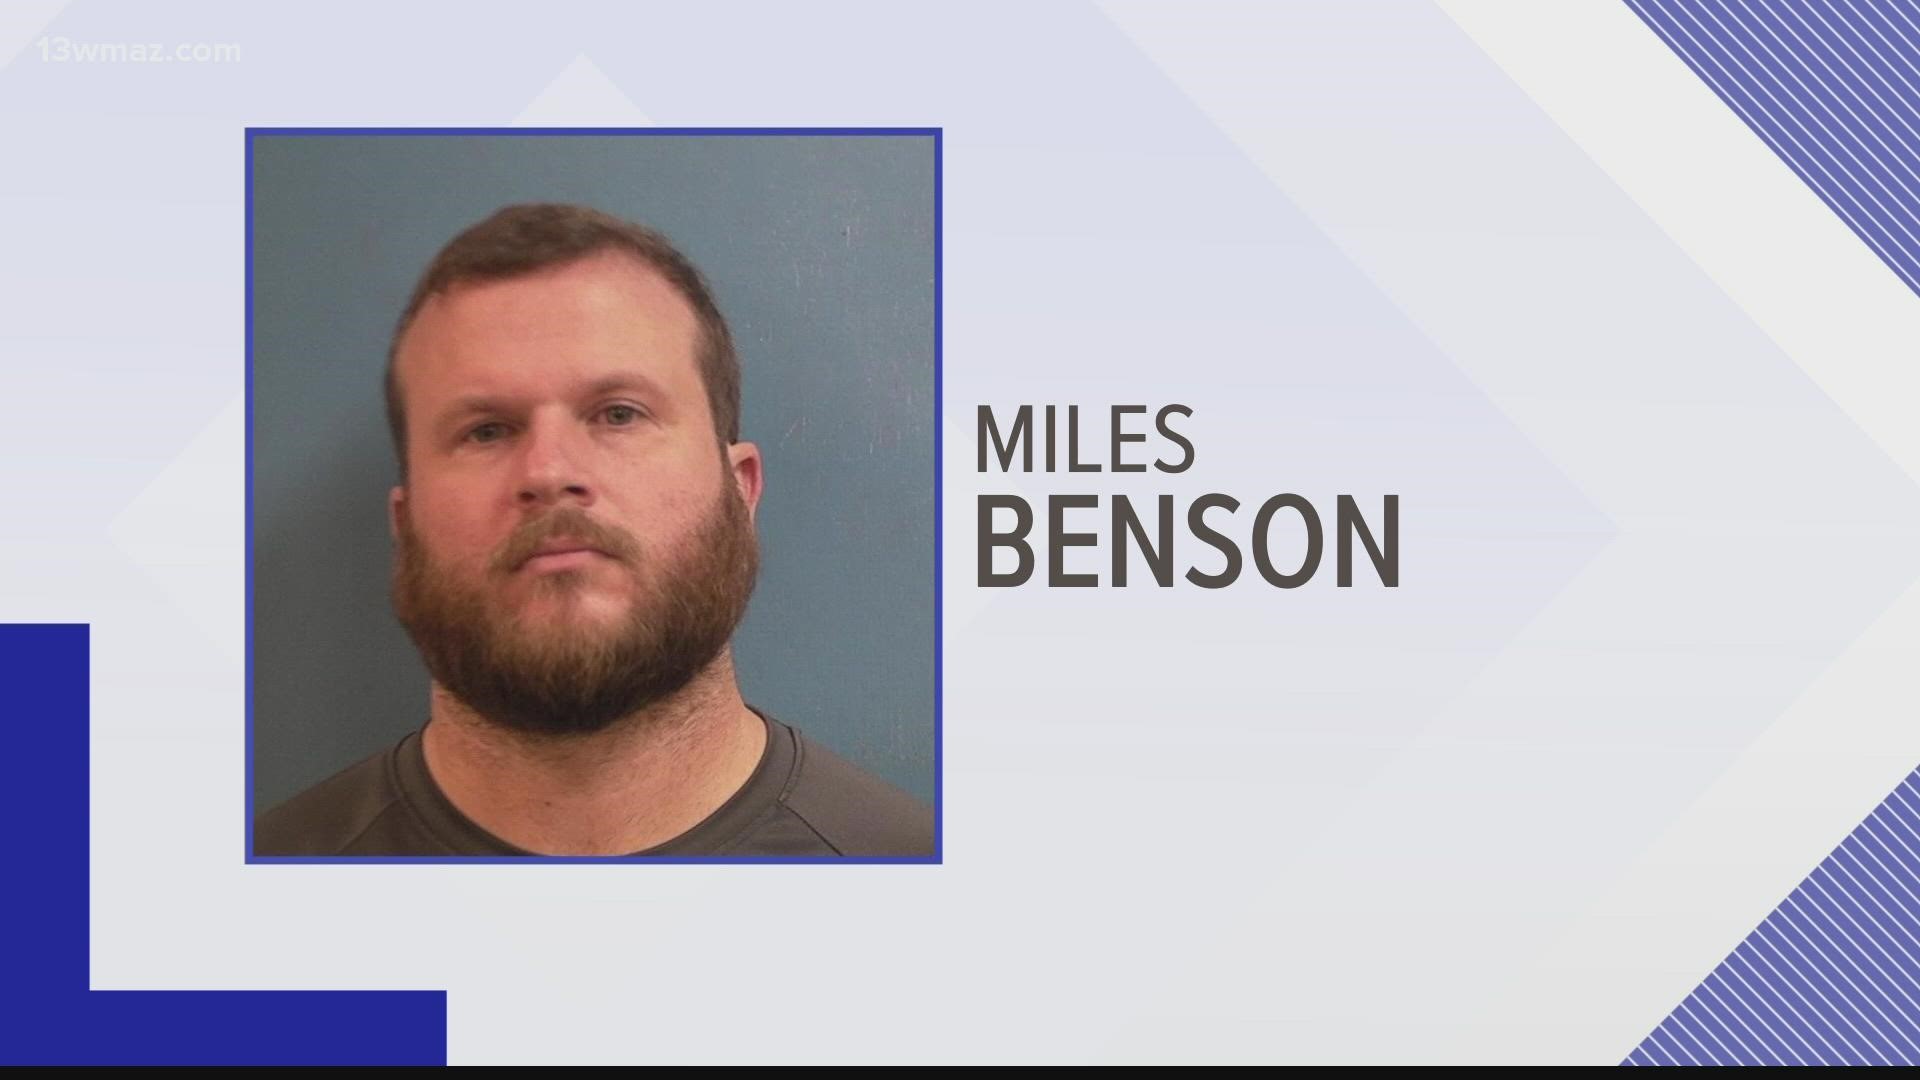 Miles Benson was arrested Thursday after investigators say he exchanged explicit material with a former student.